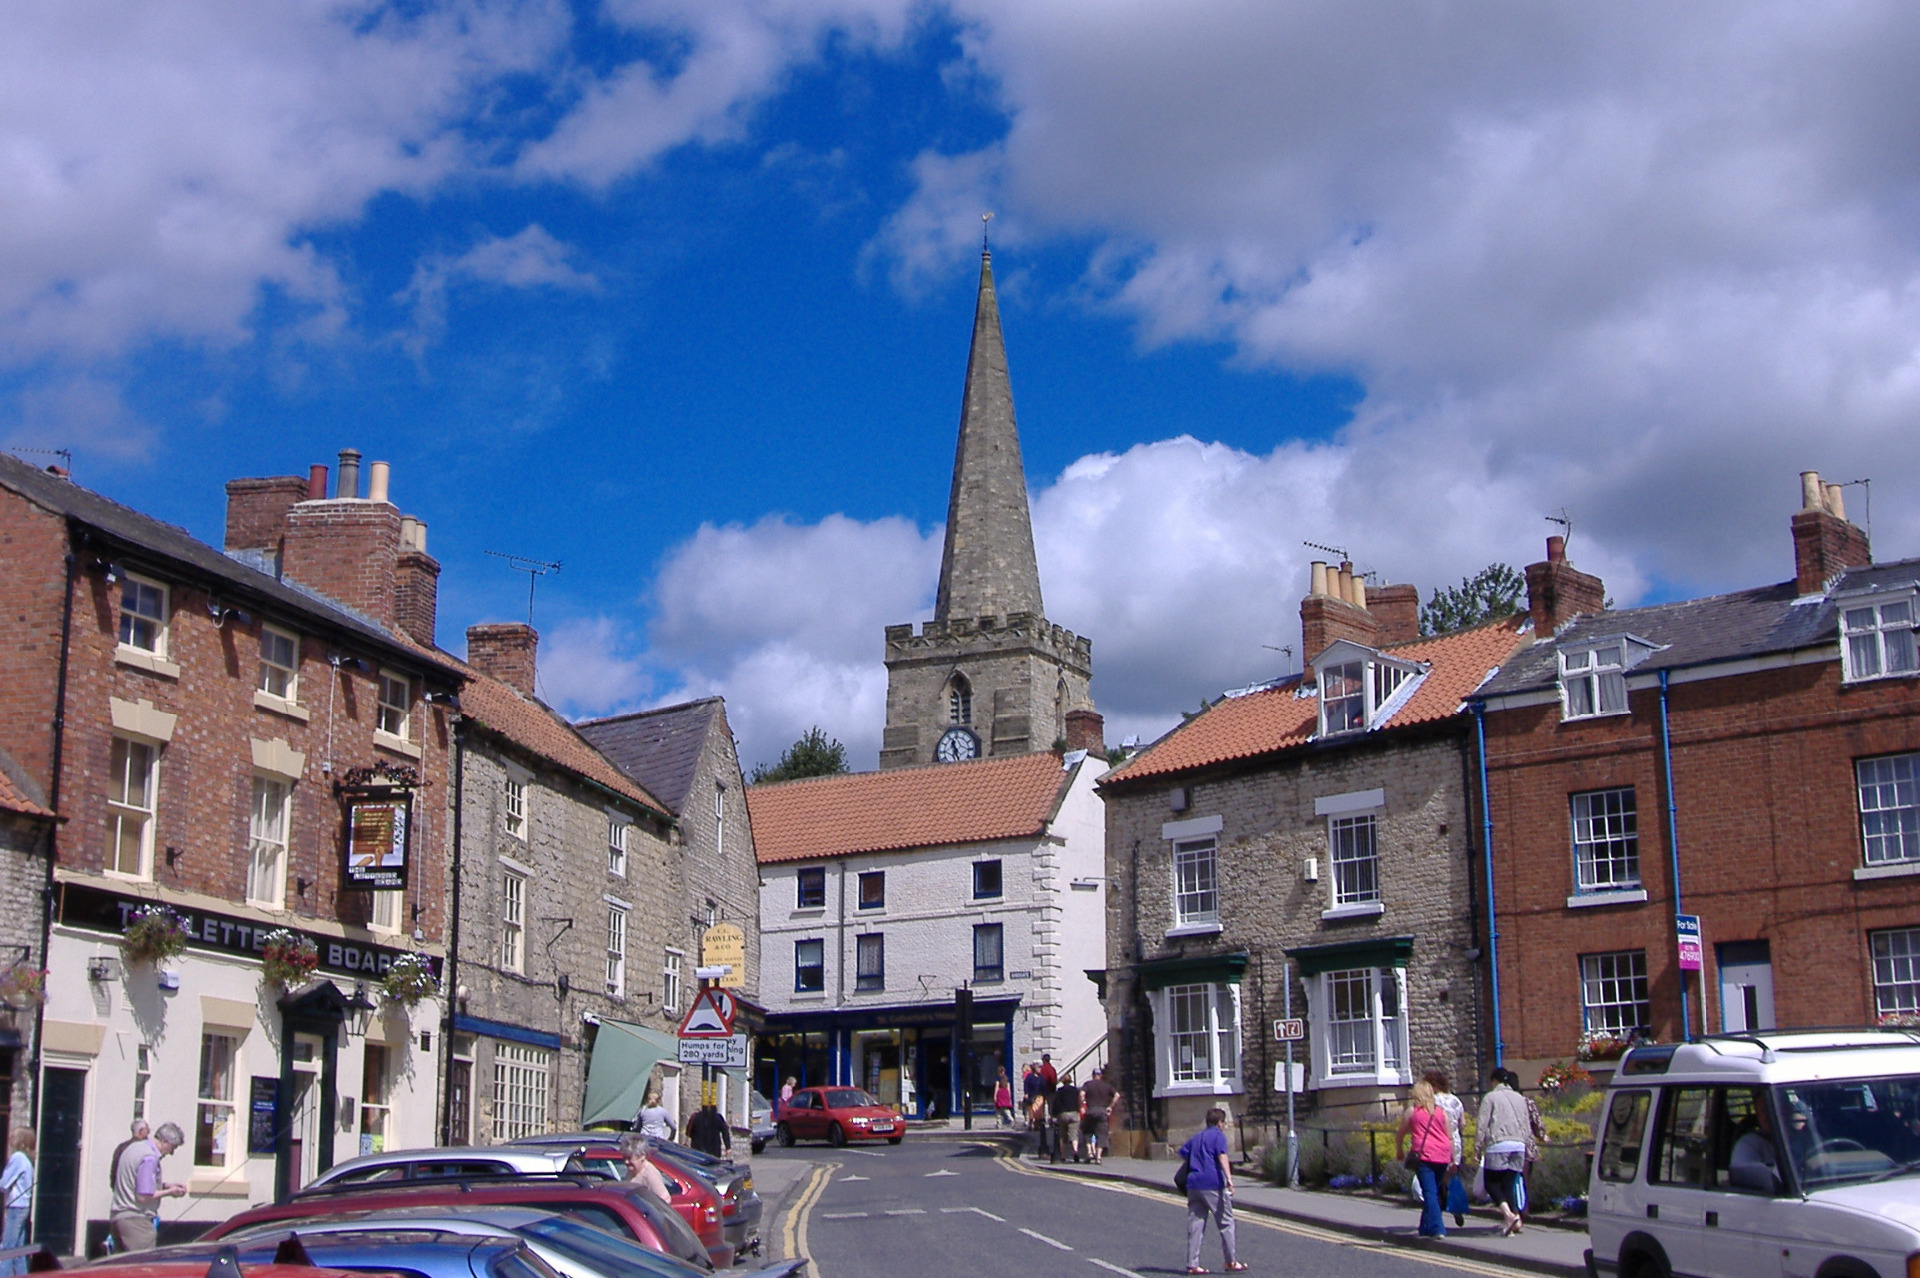 Top of the High Street in Pickering